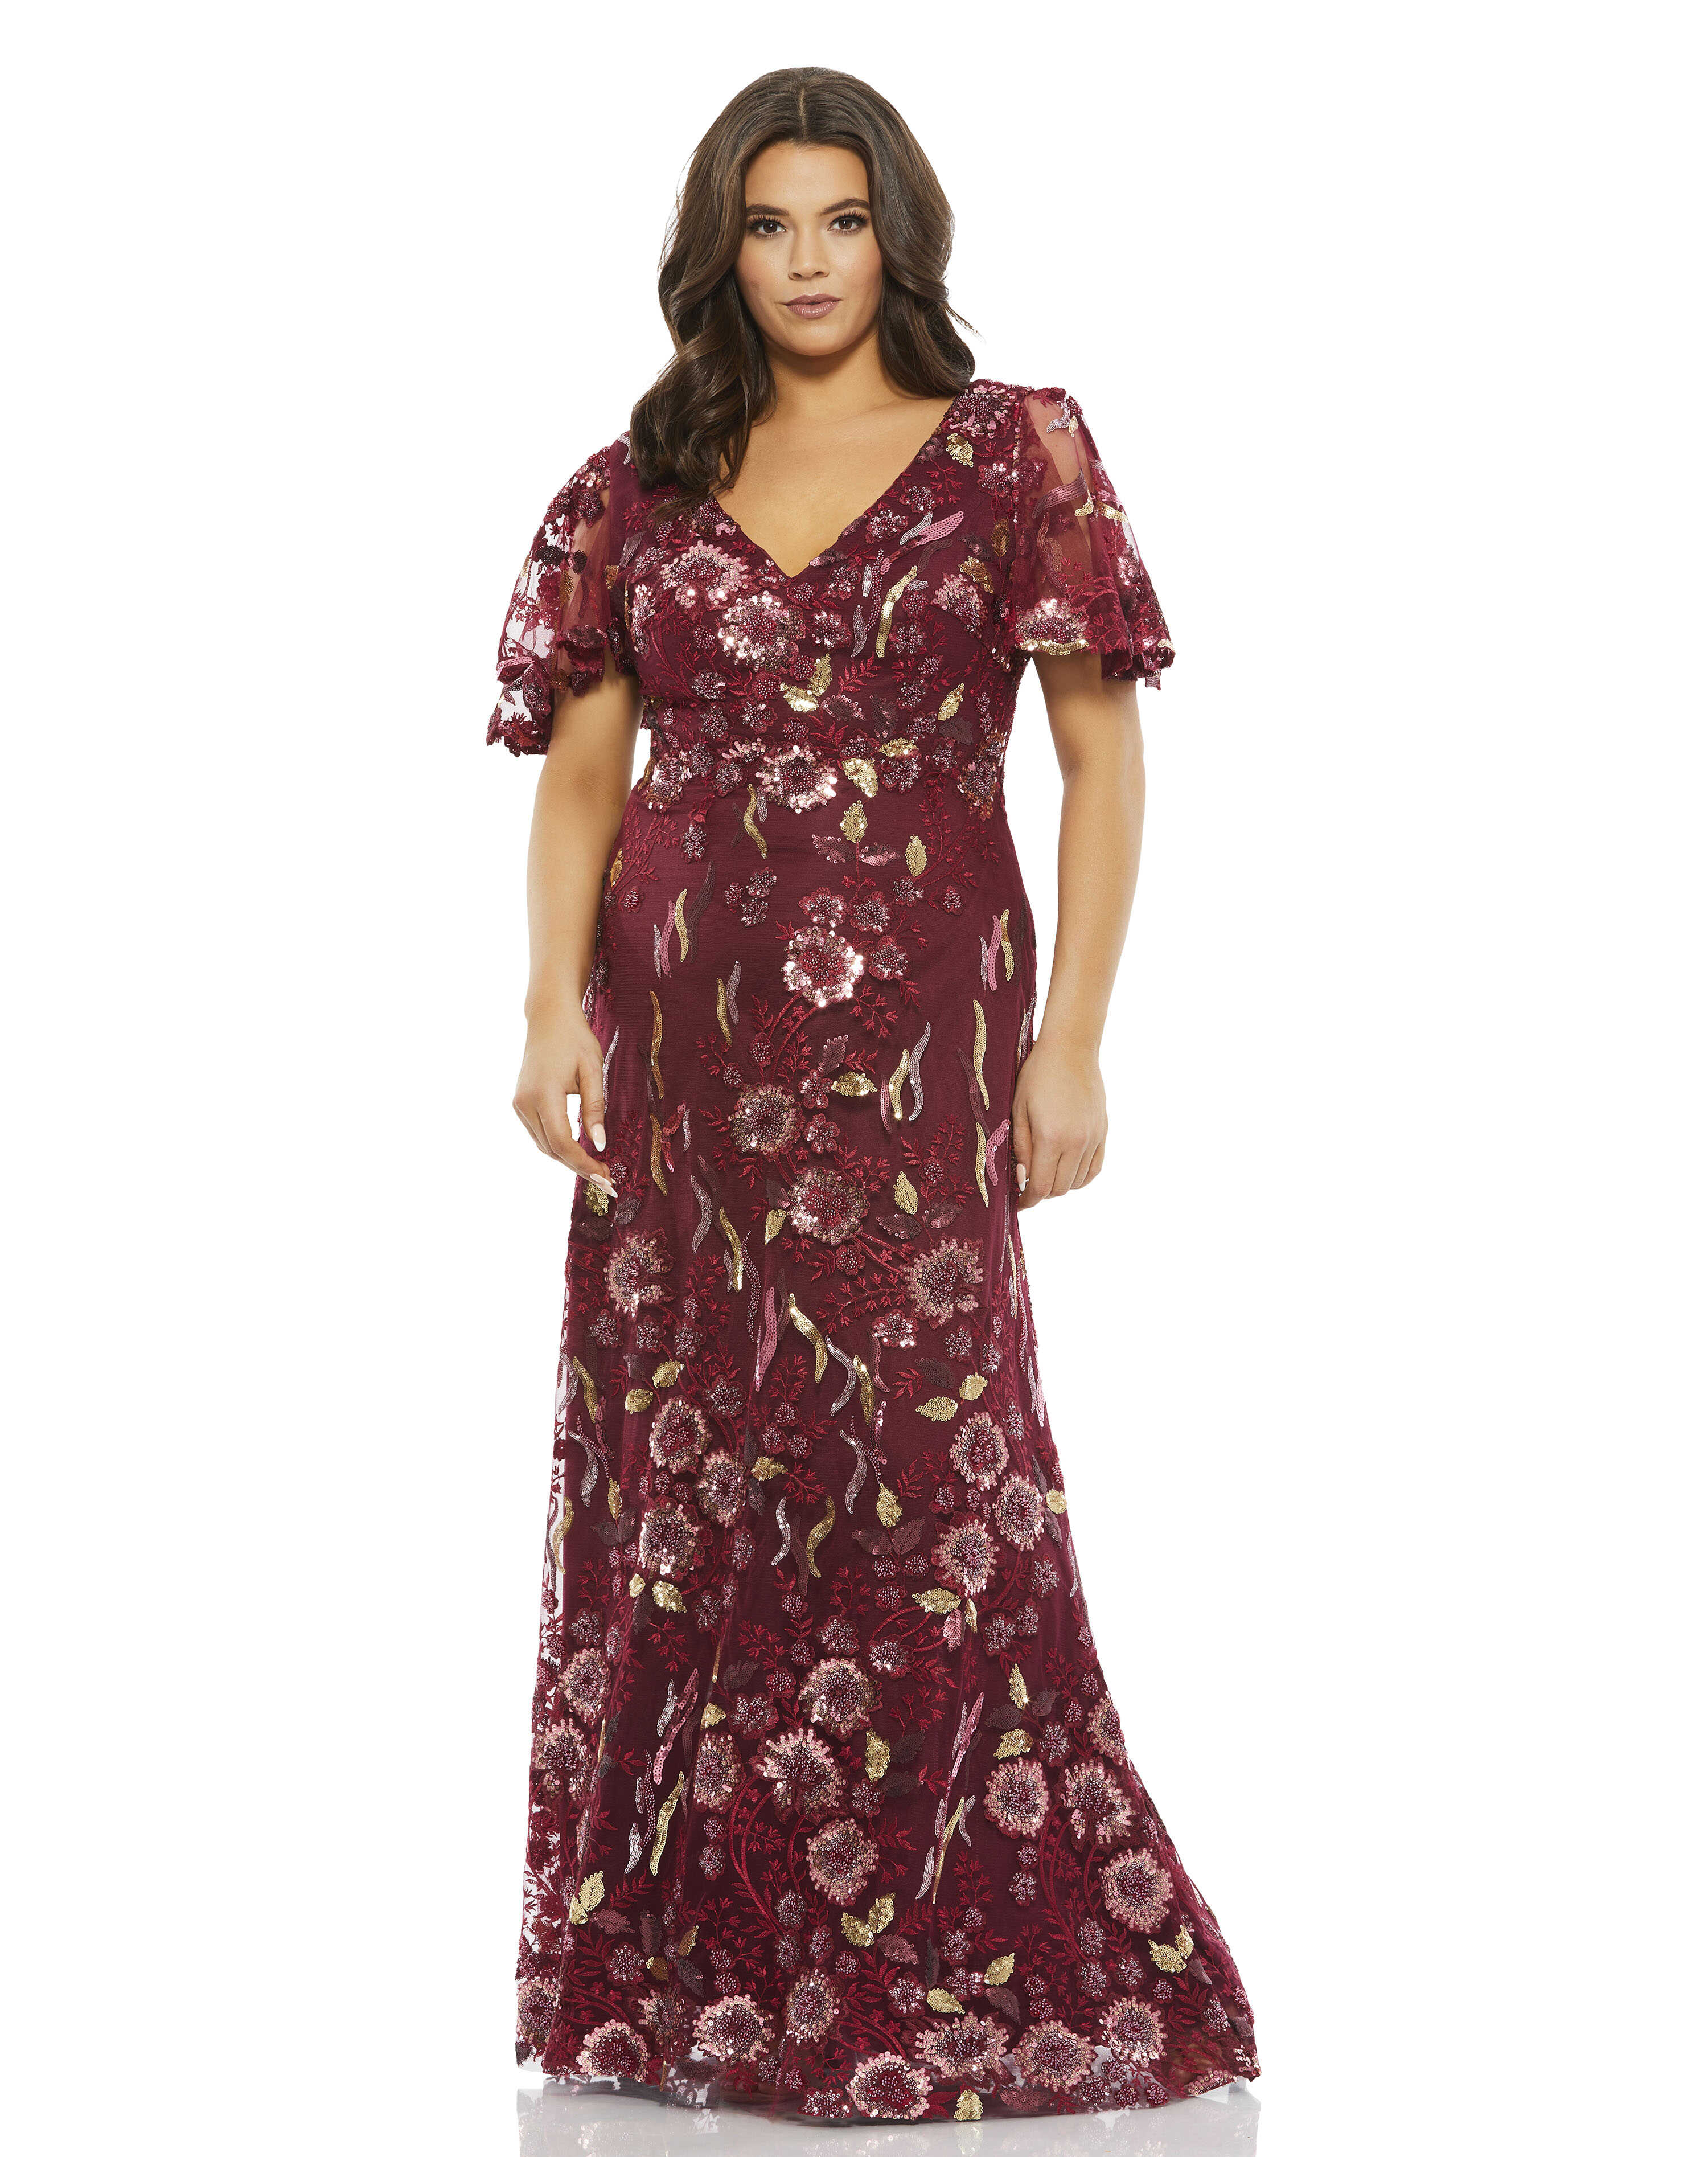 Floral Embellished Butterfly Sleeve Gown (Plus)